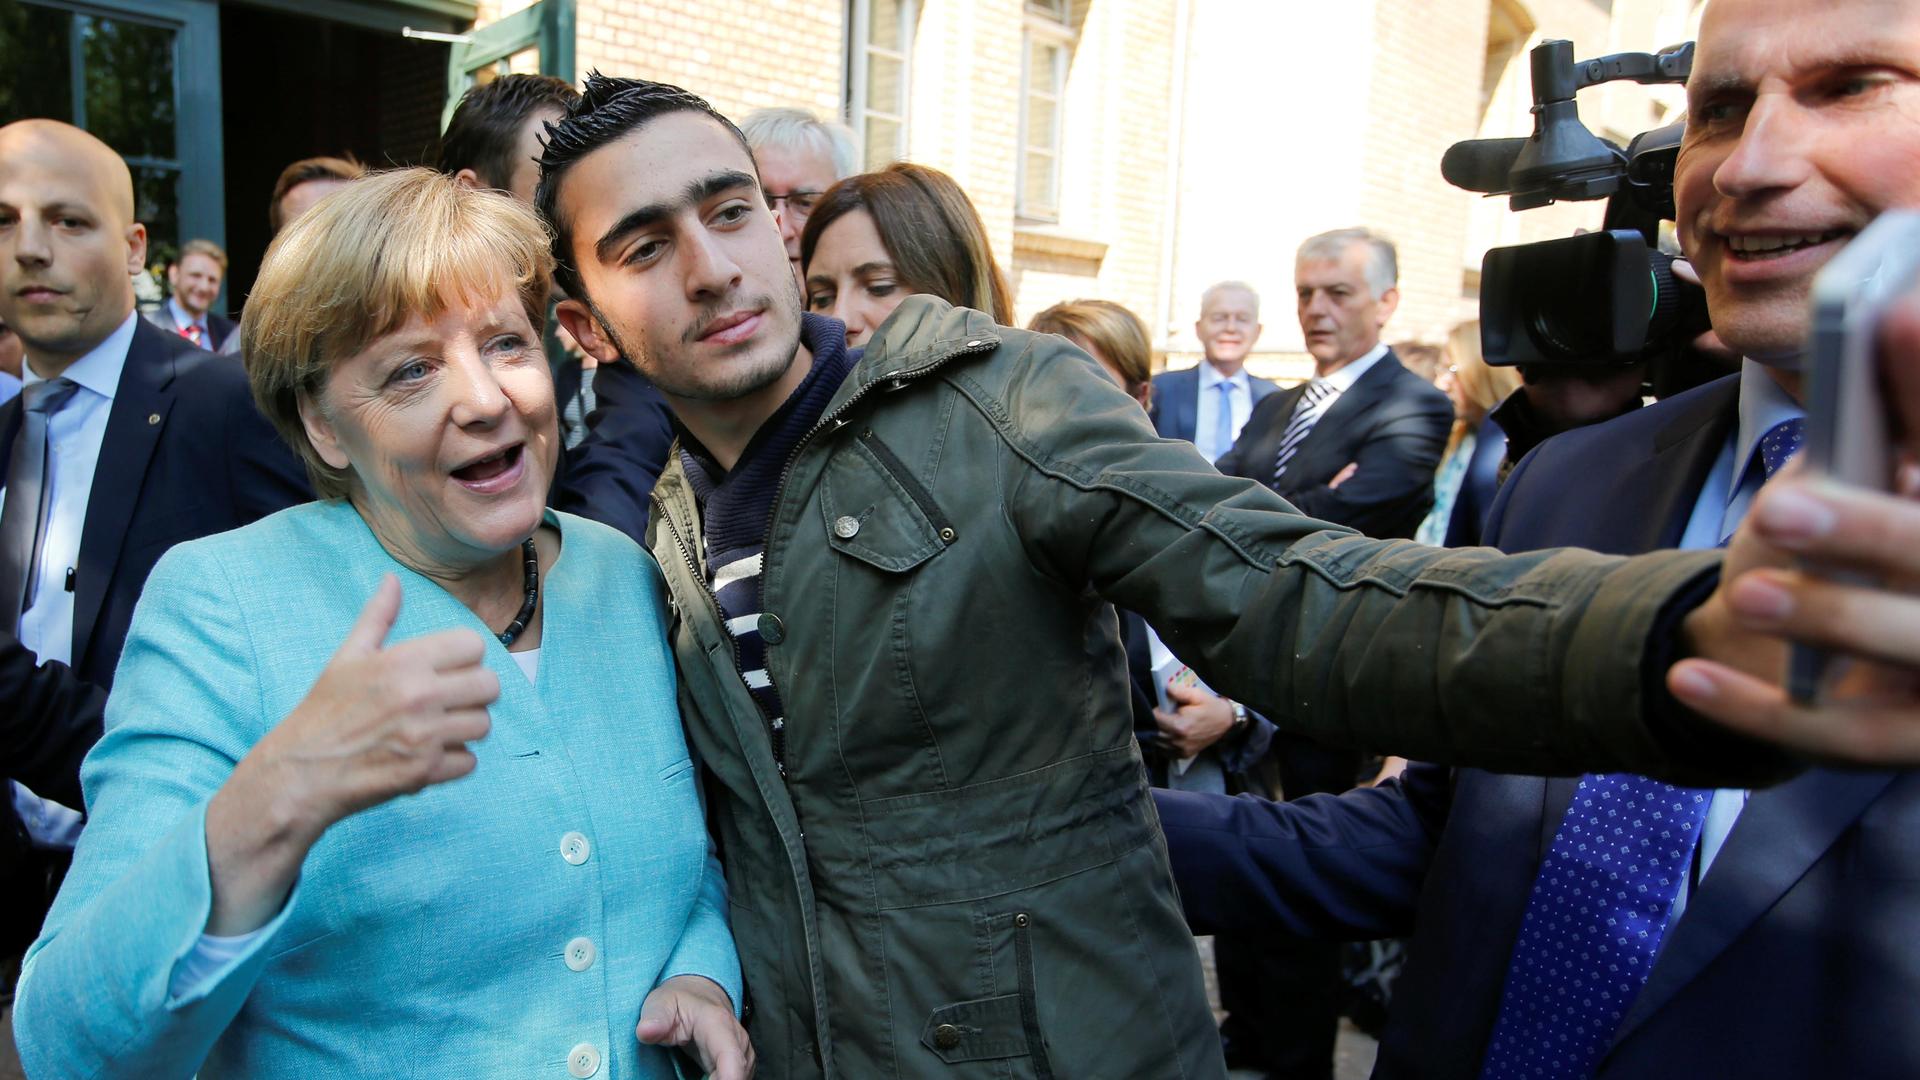 Syrian refugee Anas Modamani takes a selfie with German Chancellor Angela Merkel outside a refugee camp near the Federal Office for Migration and Refugees after registration at Berlin's Spandau district, Germany, on September 10, 2015. 